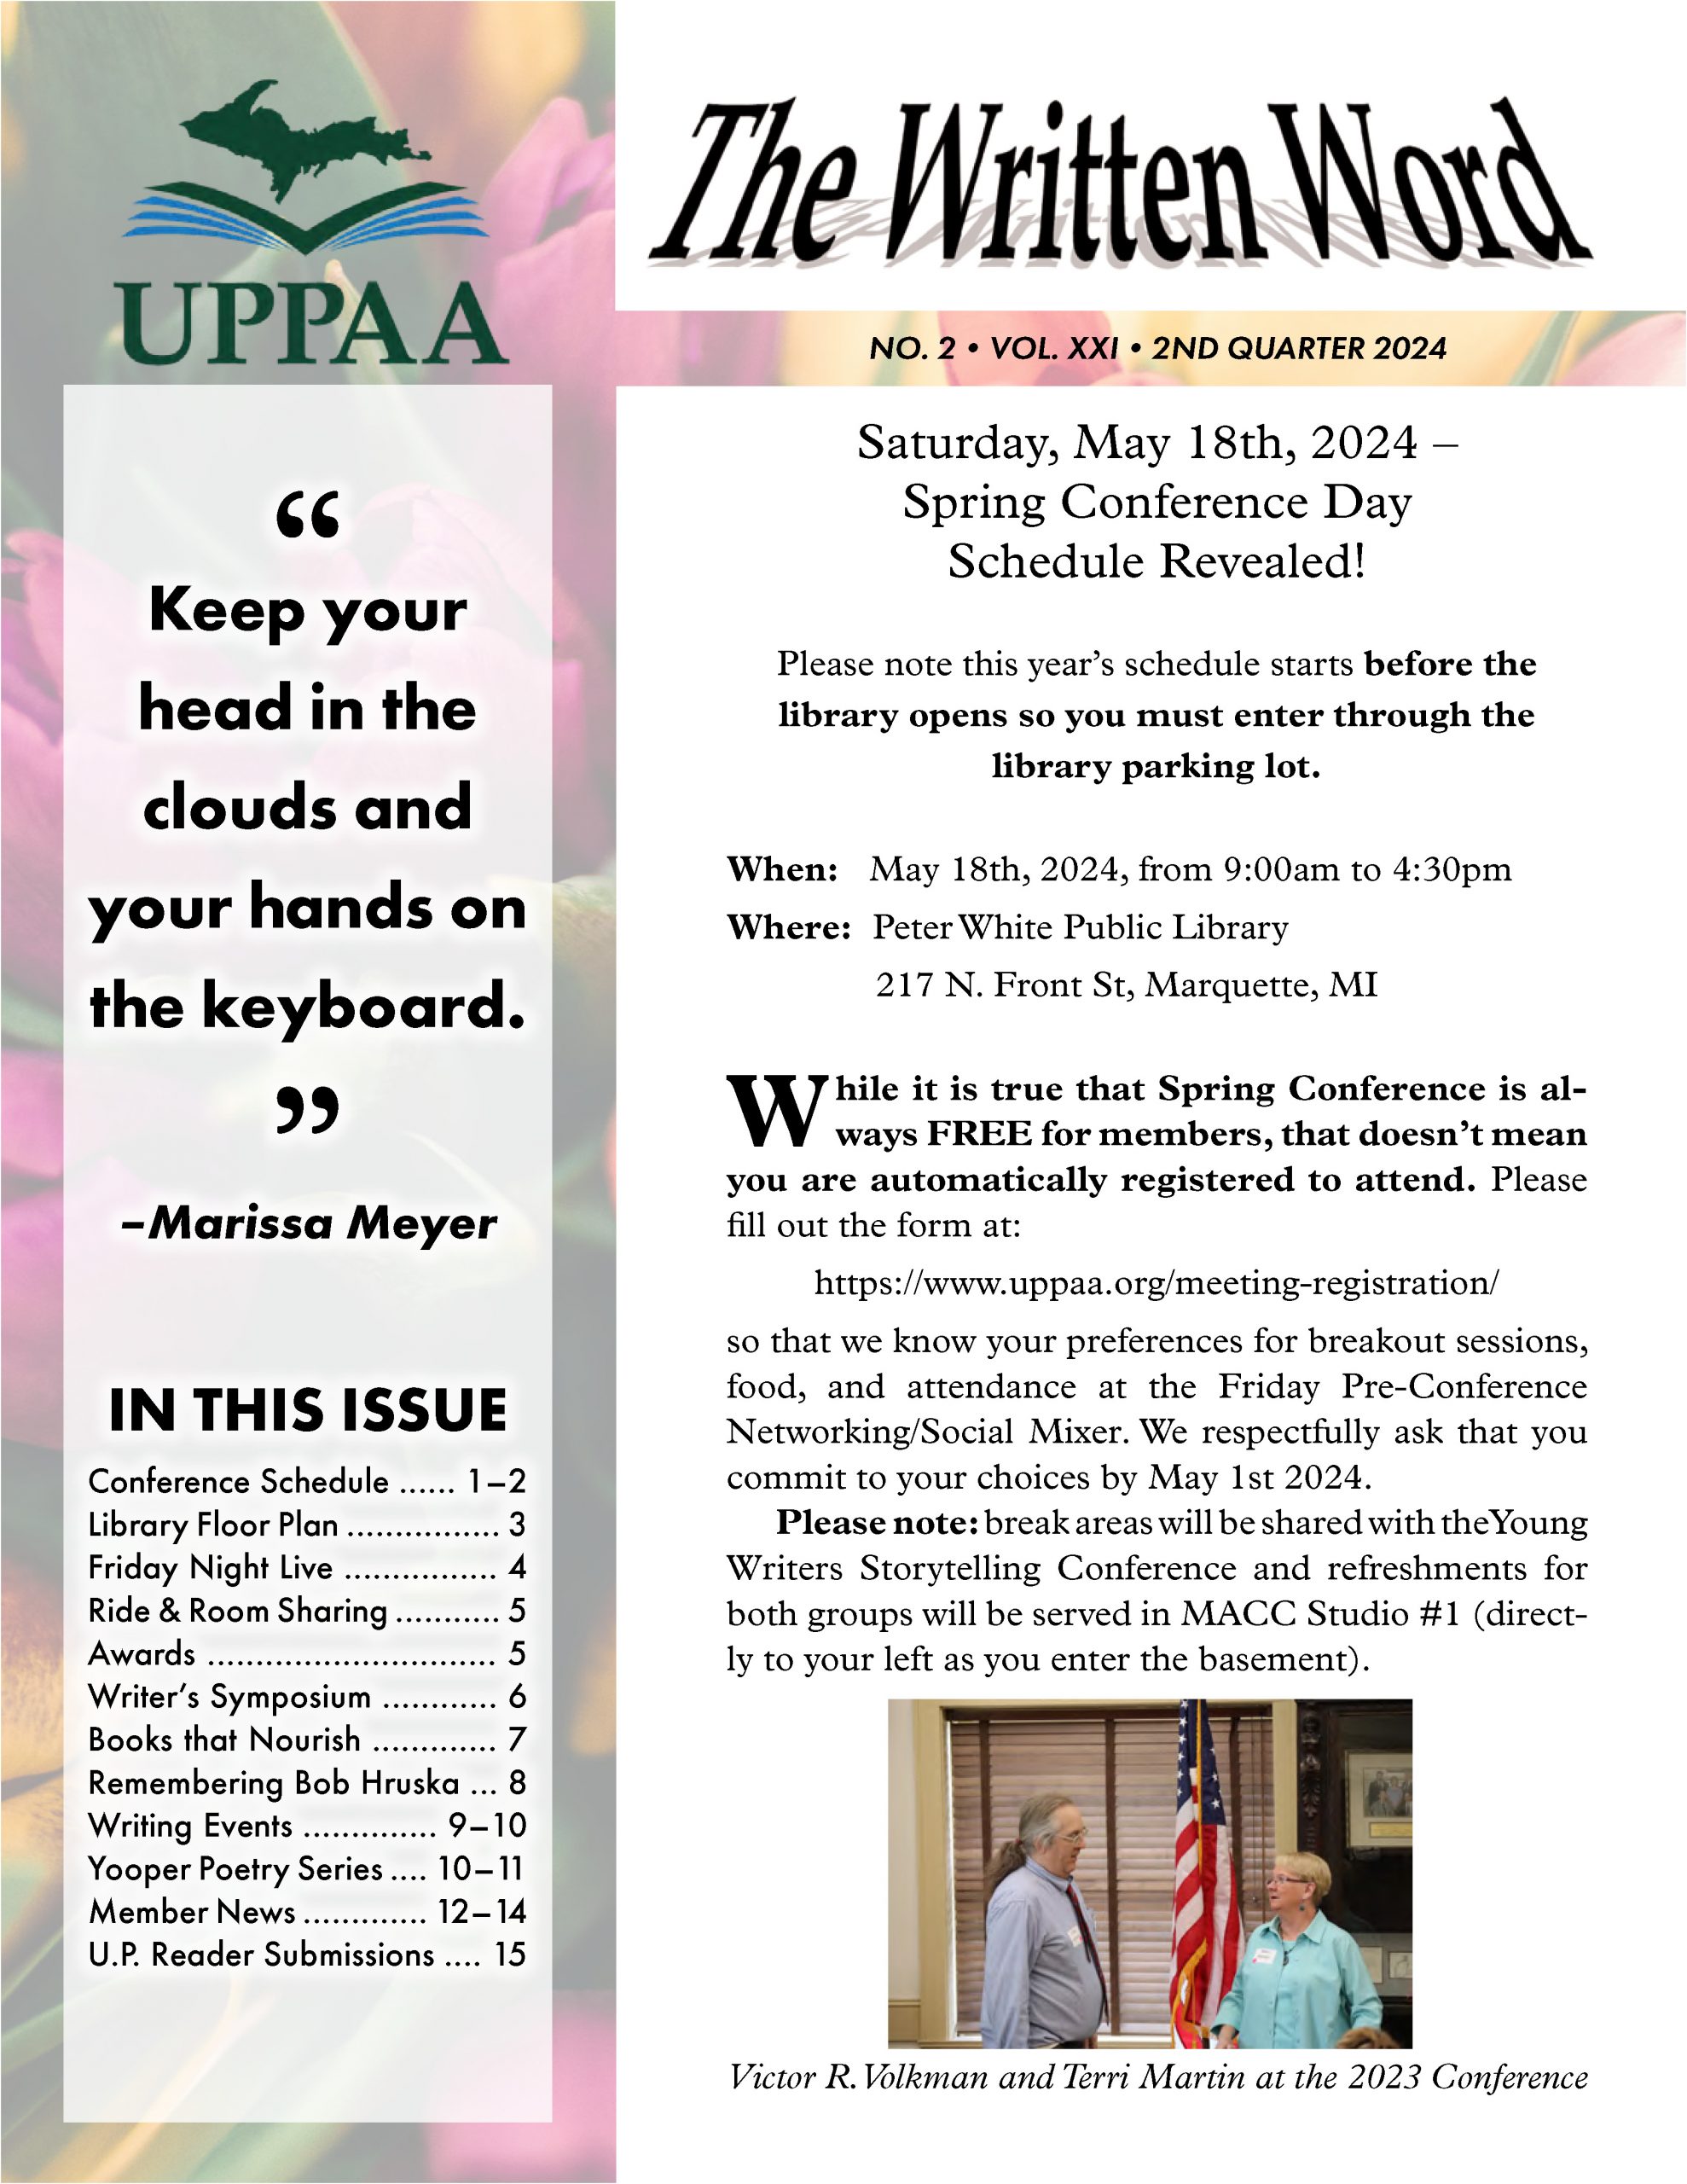 UPPAA Newsletter titled "the written word" by uppa for q2 2023, featuring conference details, library schedule updates, and contents list including various articles and membership information.